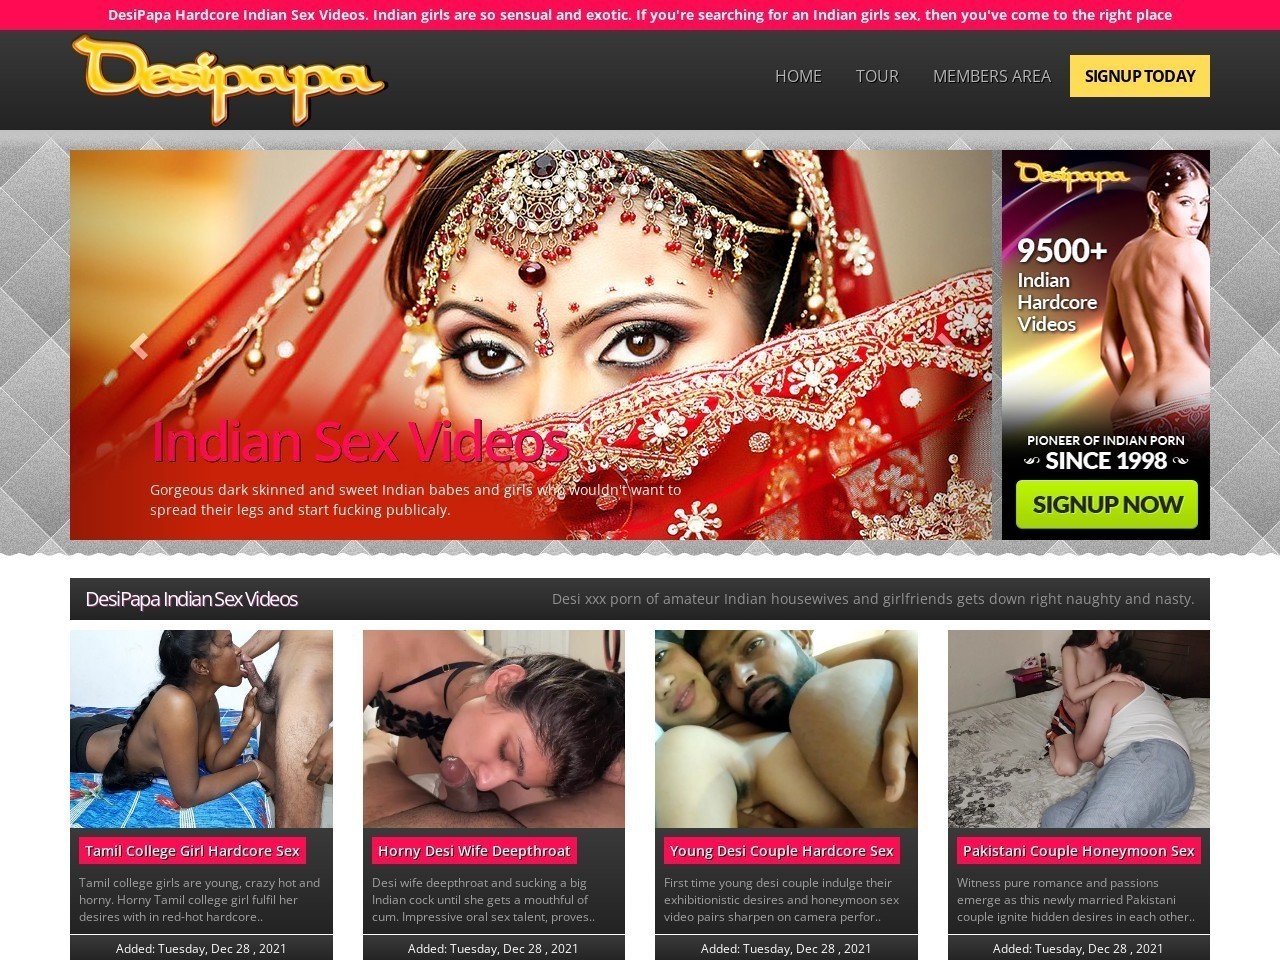 Desi Papa: The Best Place to Explore the World of Indian Sex